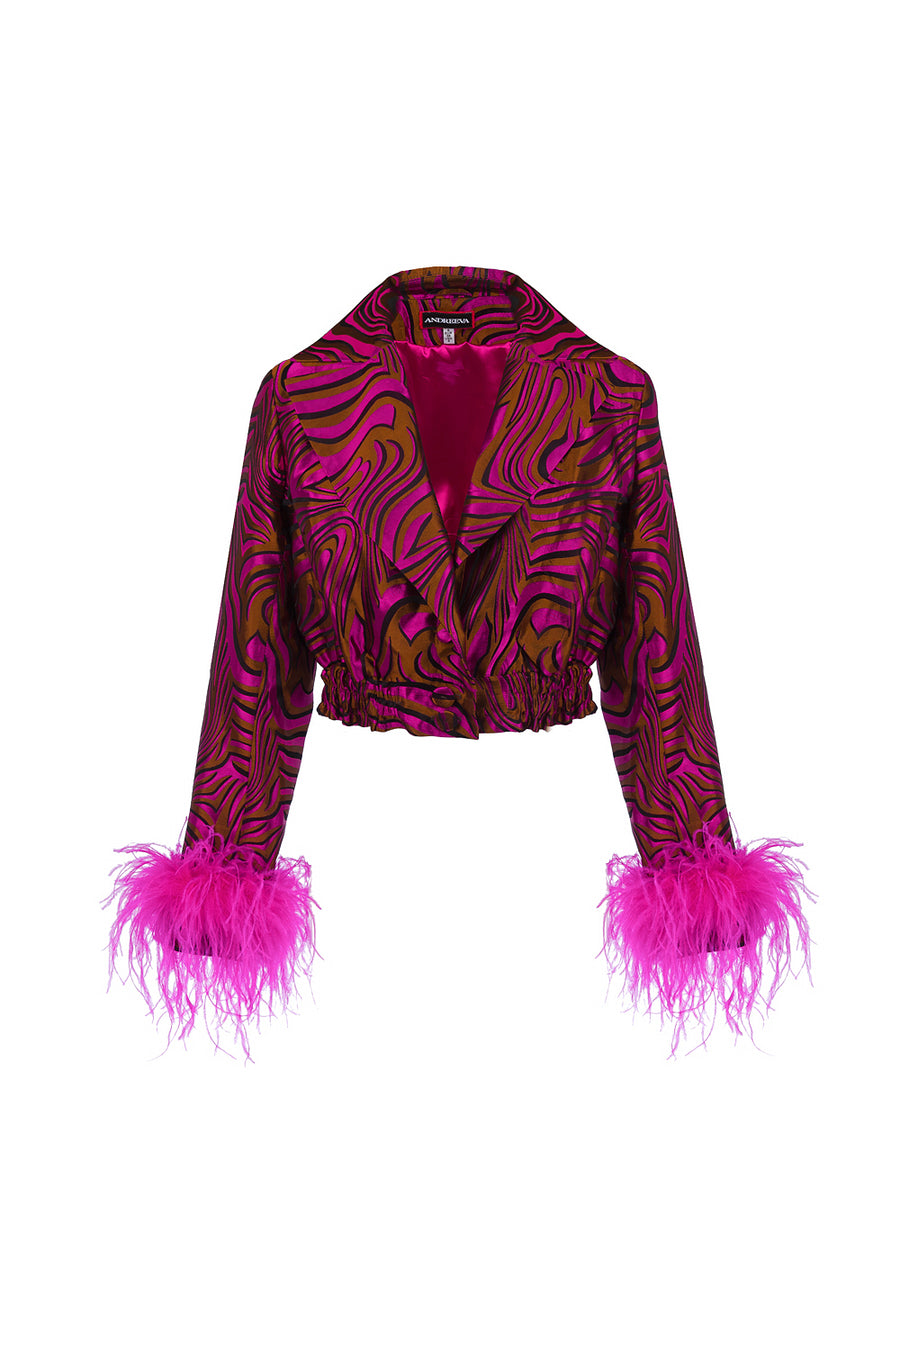 andreeva pink jacket with feathers